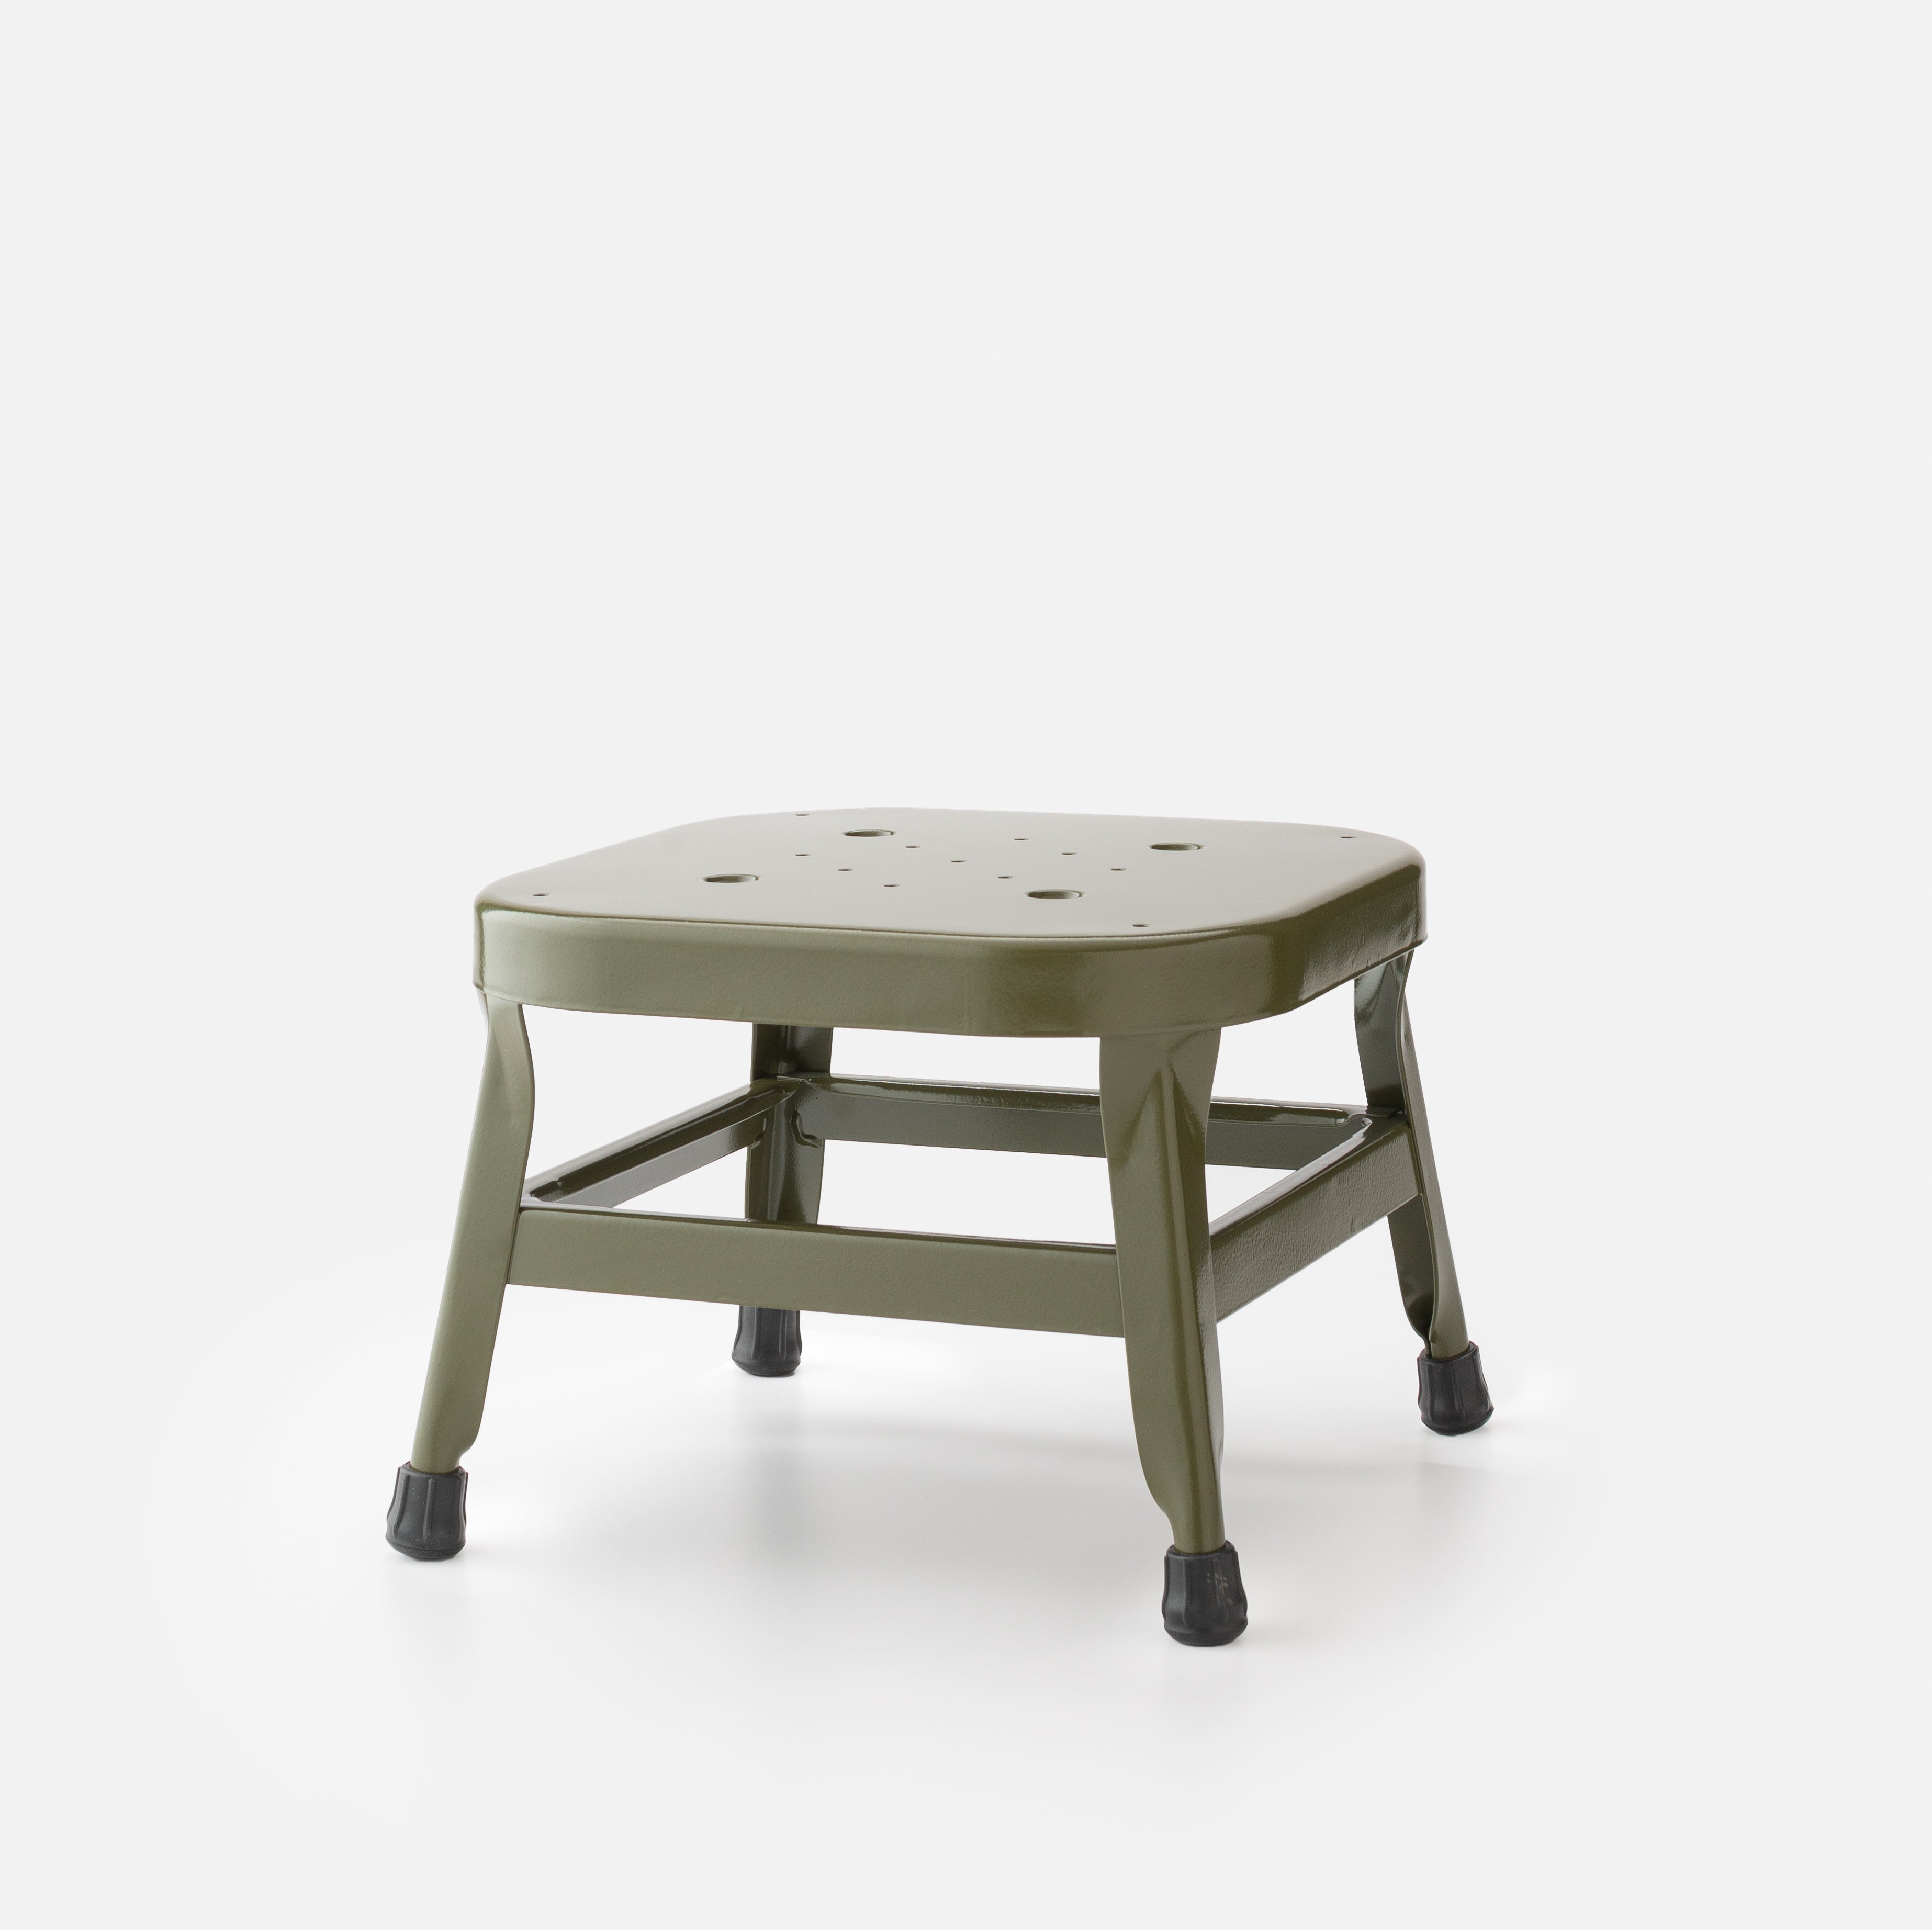 The Schoolhouse Utility Stool in Alder Gloss.